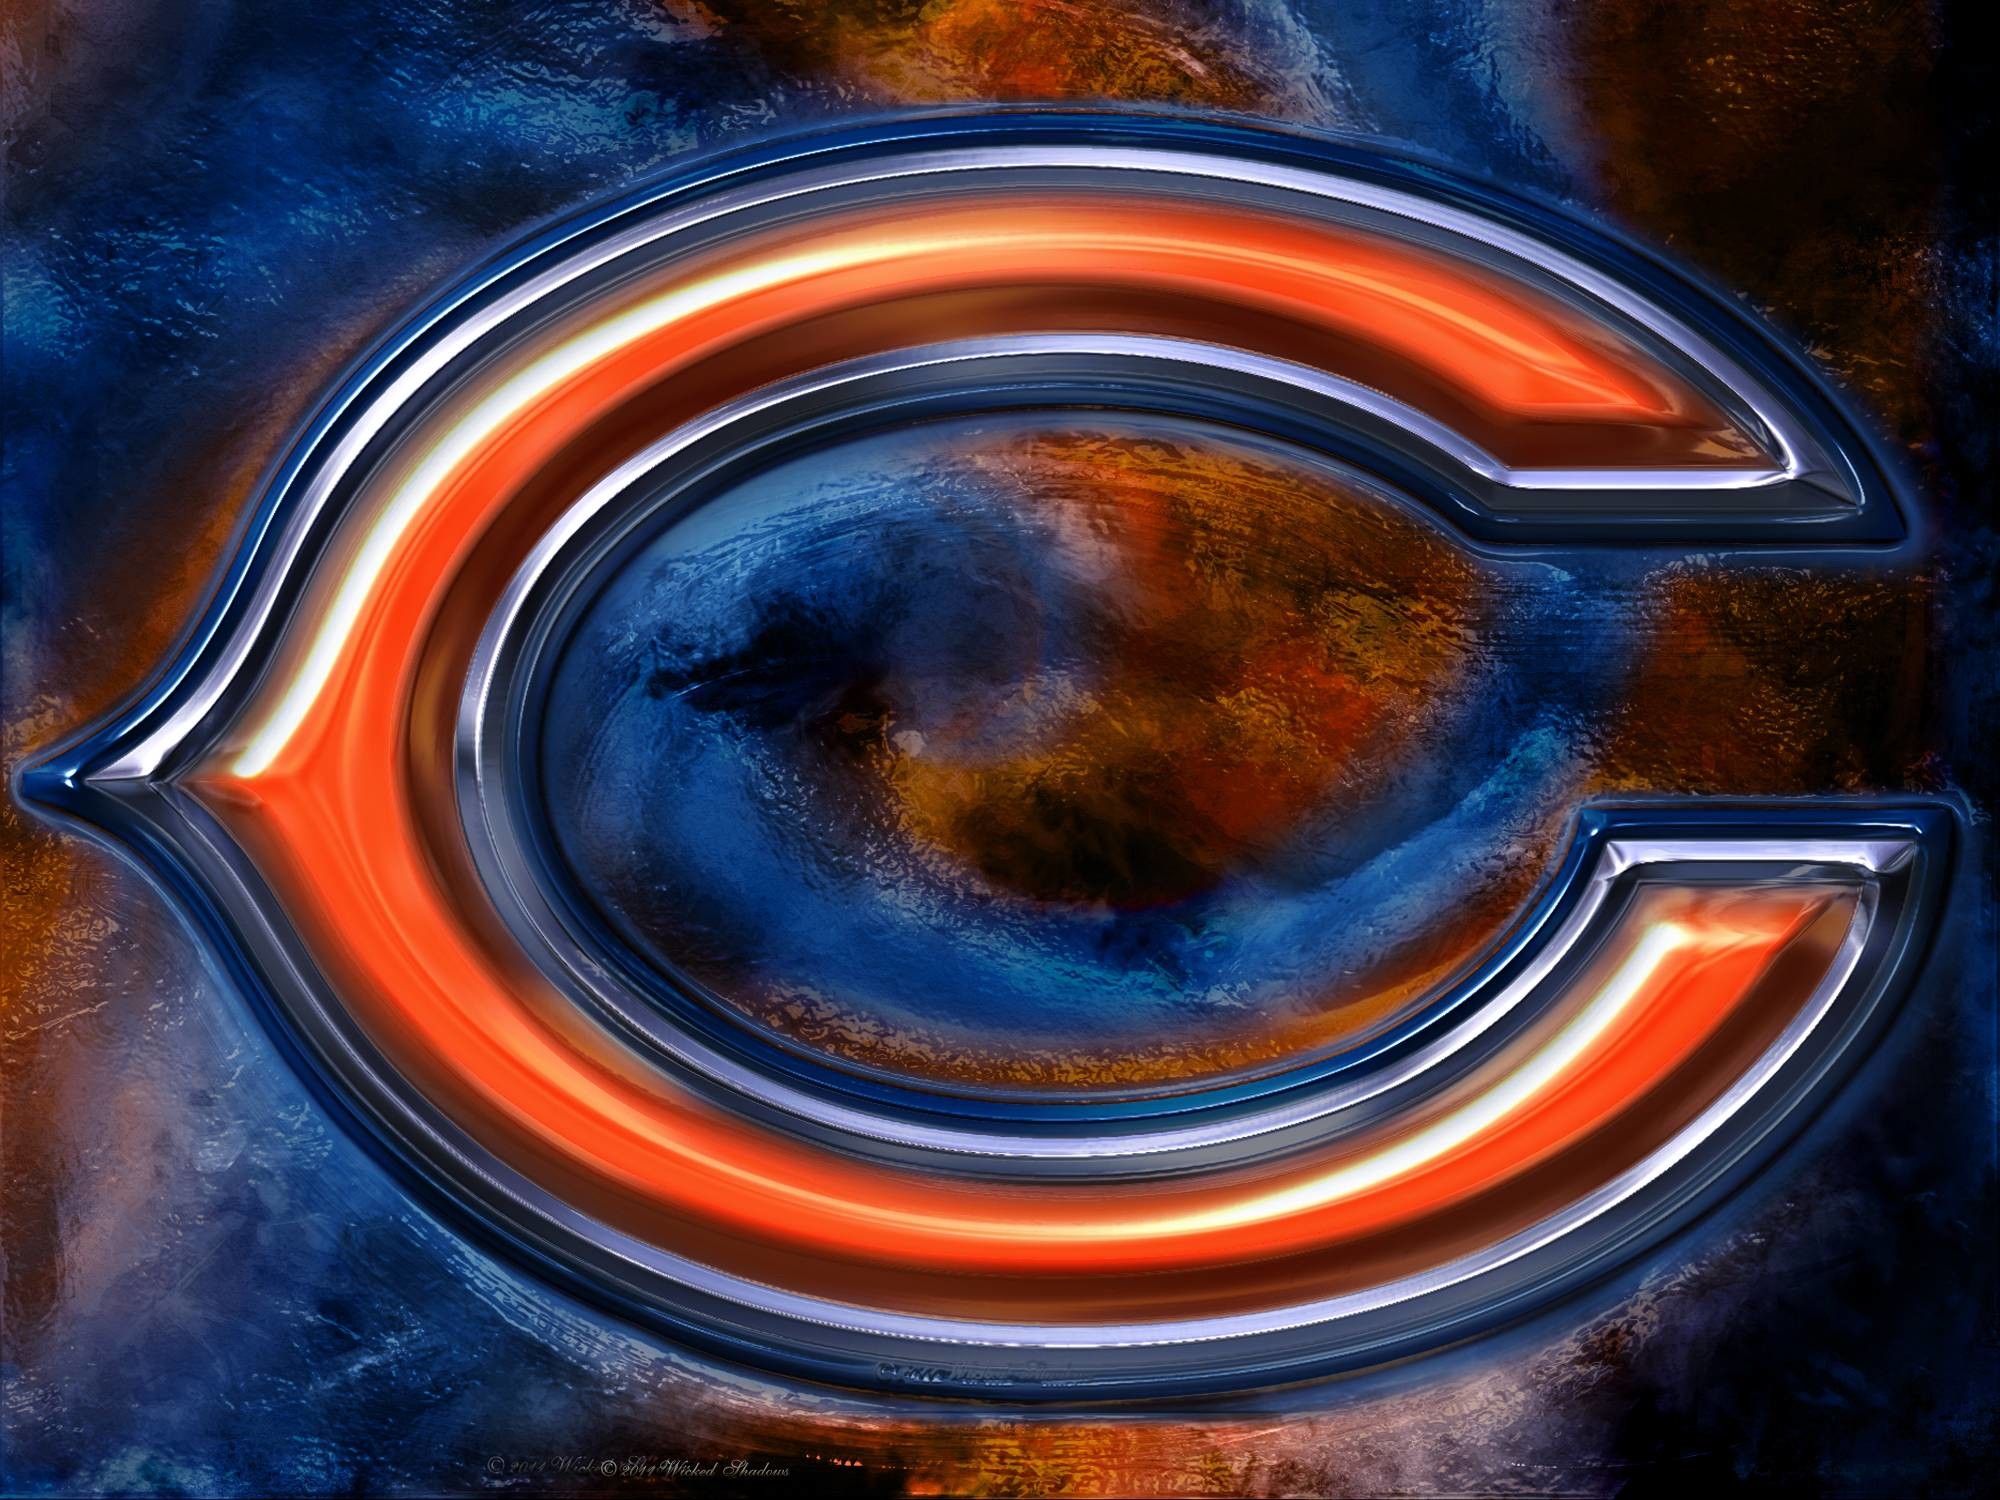 2000x1500 Chicago Bears images | Chicago Bears wallpapers